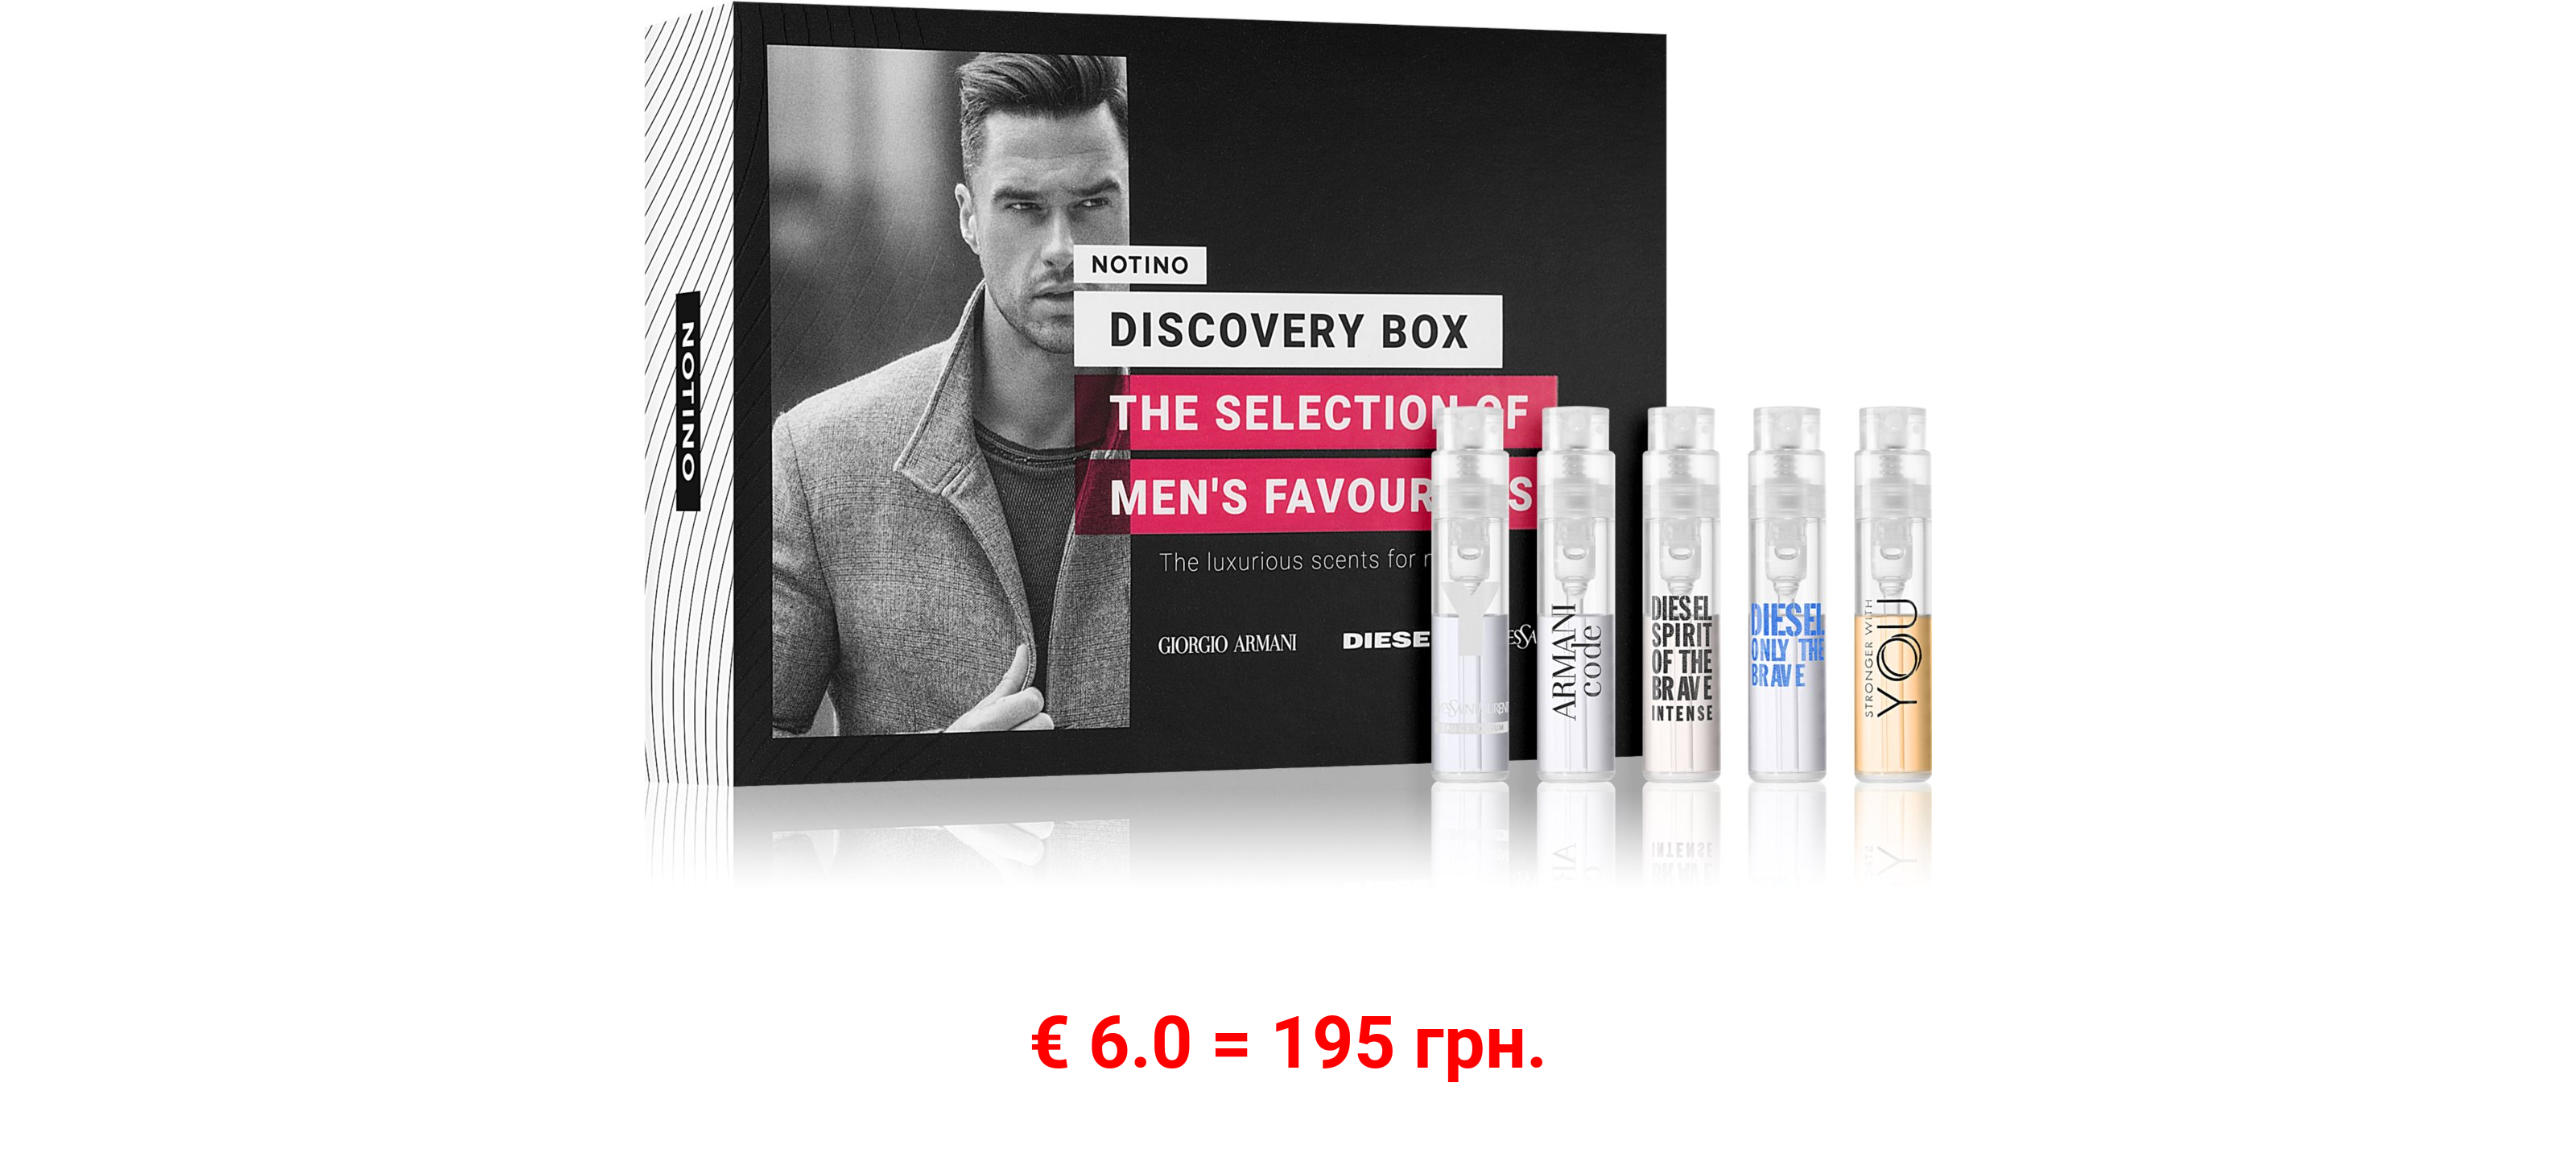 Discovery Box Notino The Selection of Men's Favourites